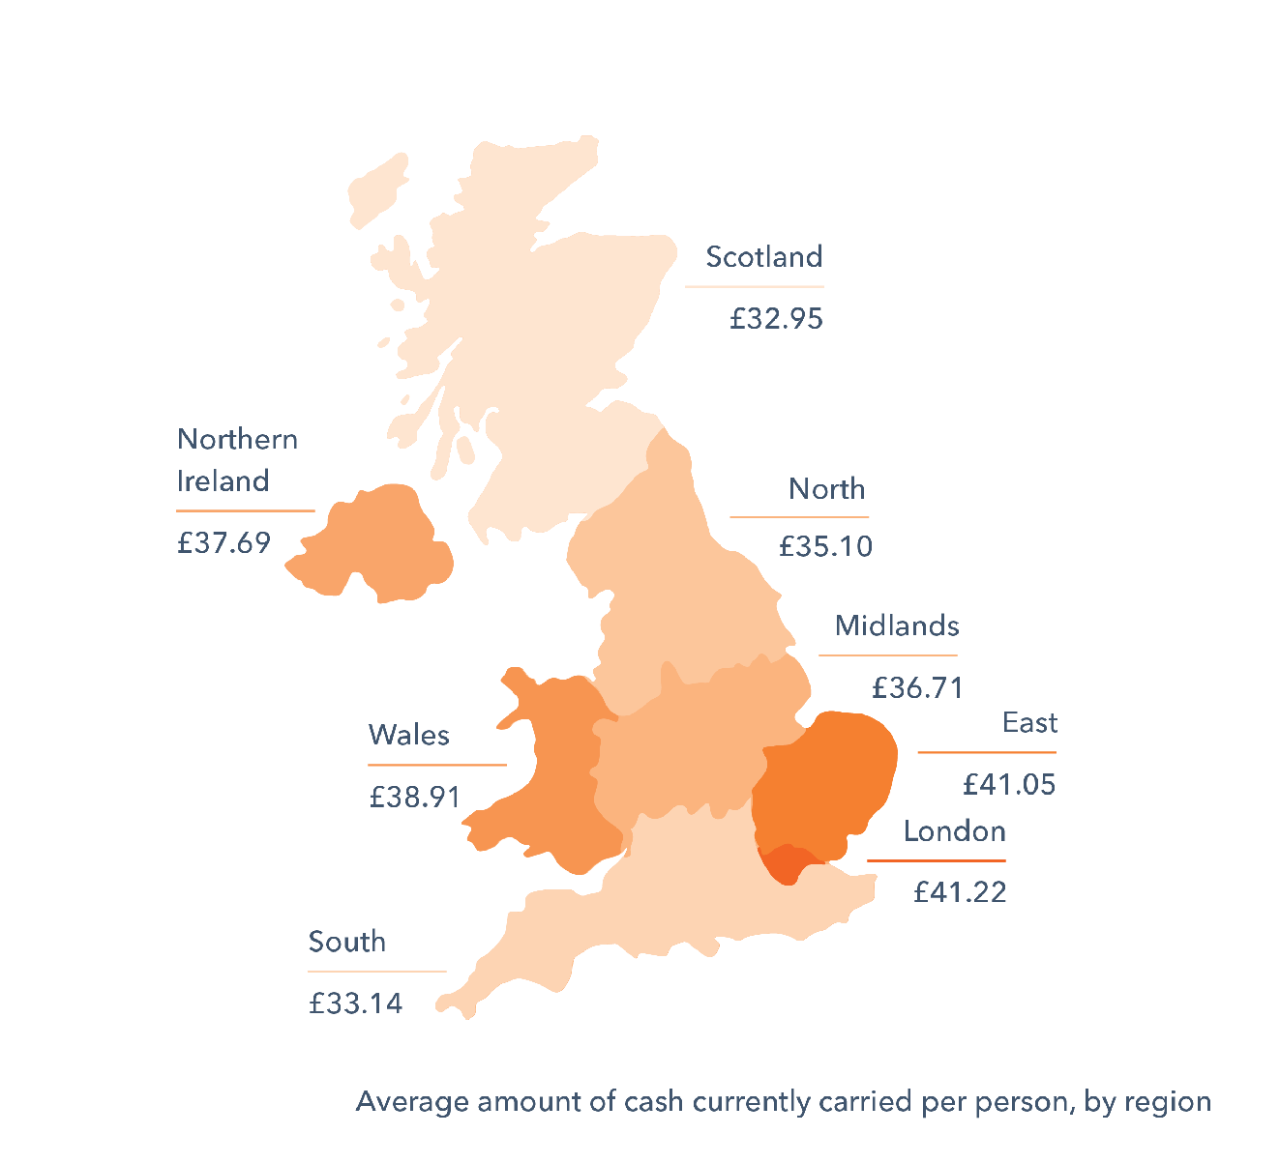 Image shows a map of UK split into its different regions. Each region is in a different shade of orange with the darker shades representing more money and the lighter shades representing less. Each section has label for the region and a monetary amount attached. From North to South the labels read Scotland (£32.95), Northern Ireland (£37.69), North (£35.10), Midlands (£36.71), Wales (£38.91), East (£41.05), London (£41.22) and South (£33.14). Below the map a line of text reads 'average amount of cash currently carried per person, by region'.